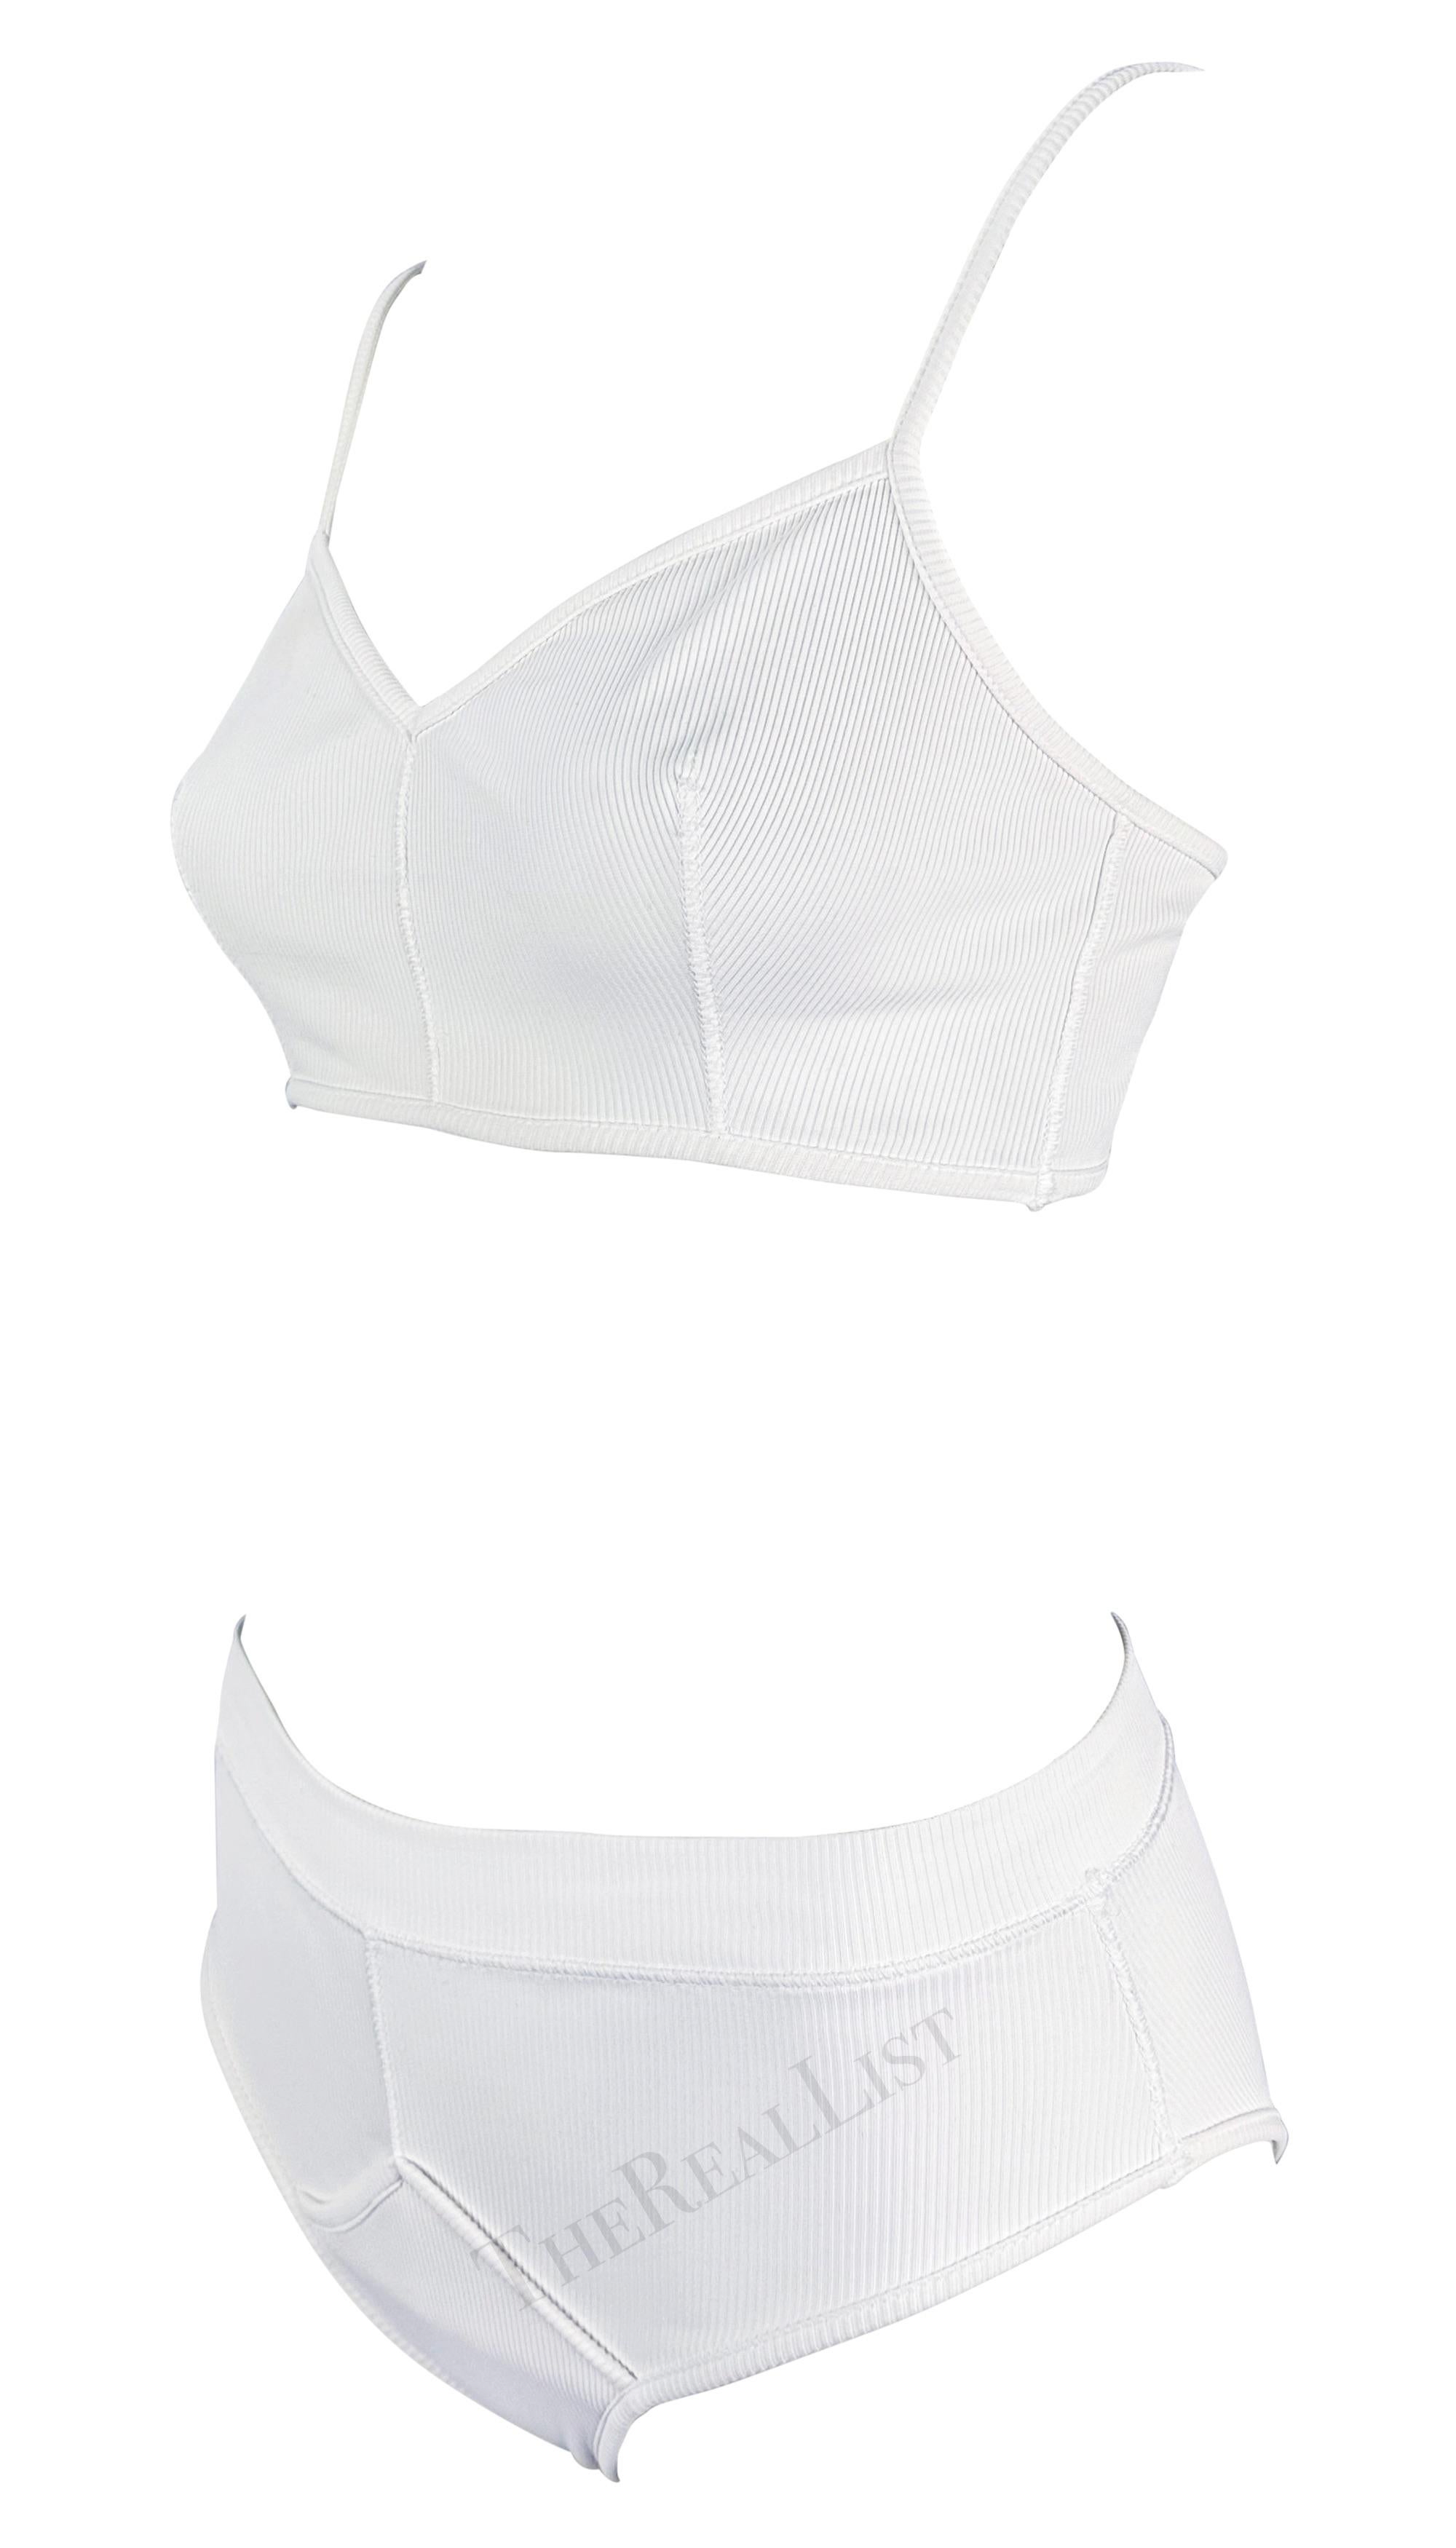 Presenting a white ribbed Dolce & Gabbana beach bikini set. From the Spring/Summer 1994 collection, this matching set consists of an ultra-cropped tank top and high-waisted briefs. The top features spaghetti straps and a v-neckline. The matching